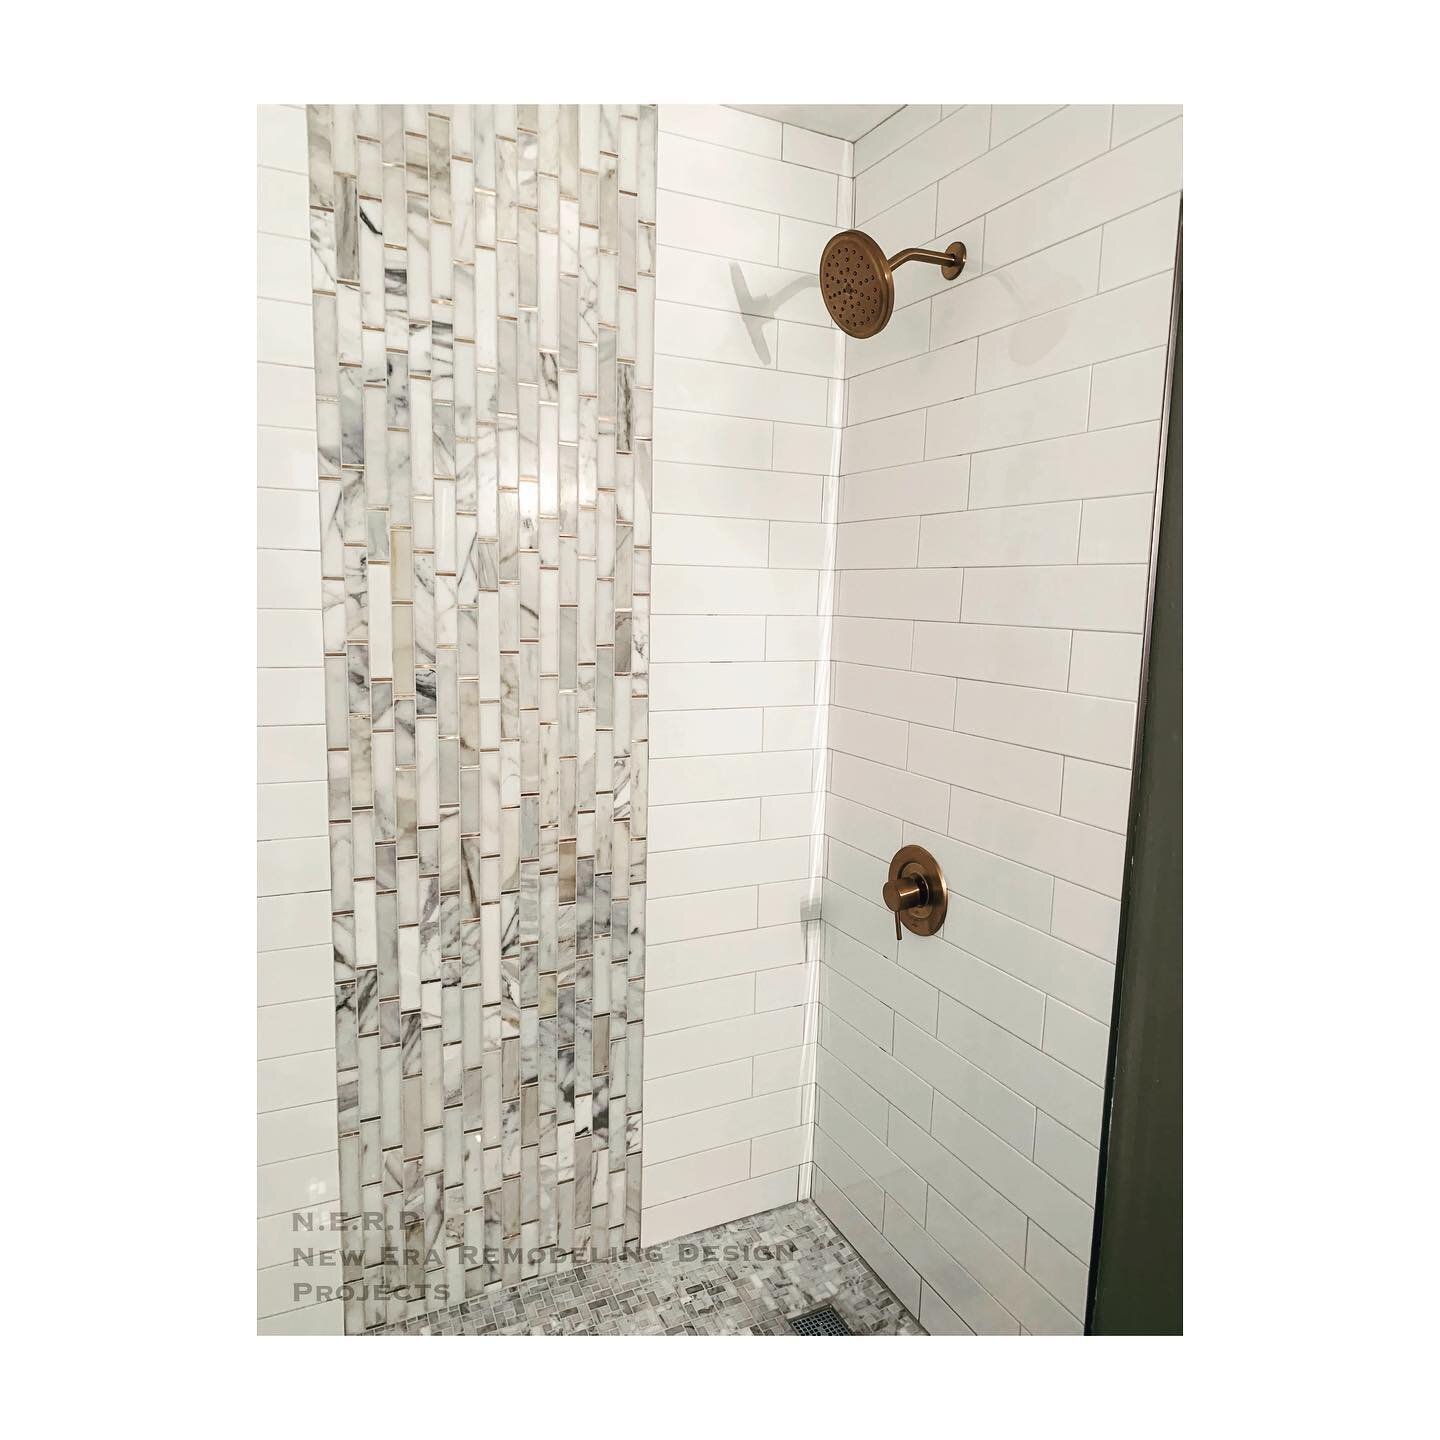 Another tub to Custom Shower install.  Complete remodel. Before &amp; After .#TeamNeRdProjects #interiorremodeling #homeimprovement #houzz #HGTV #brooklyncontractor #interiordesign #remodeling #spaceplanning #architecturedesign #diy #architecture #co